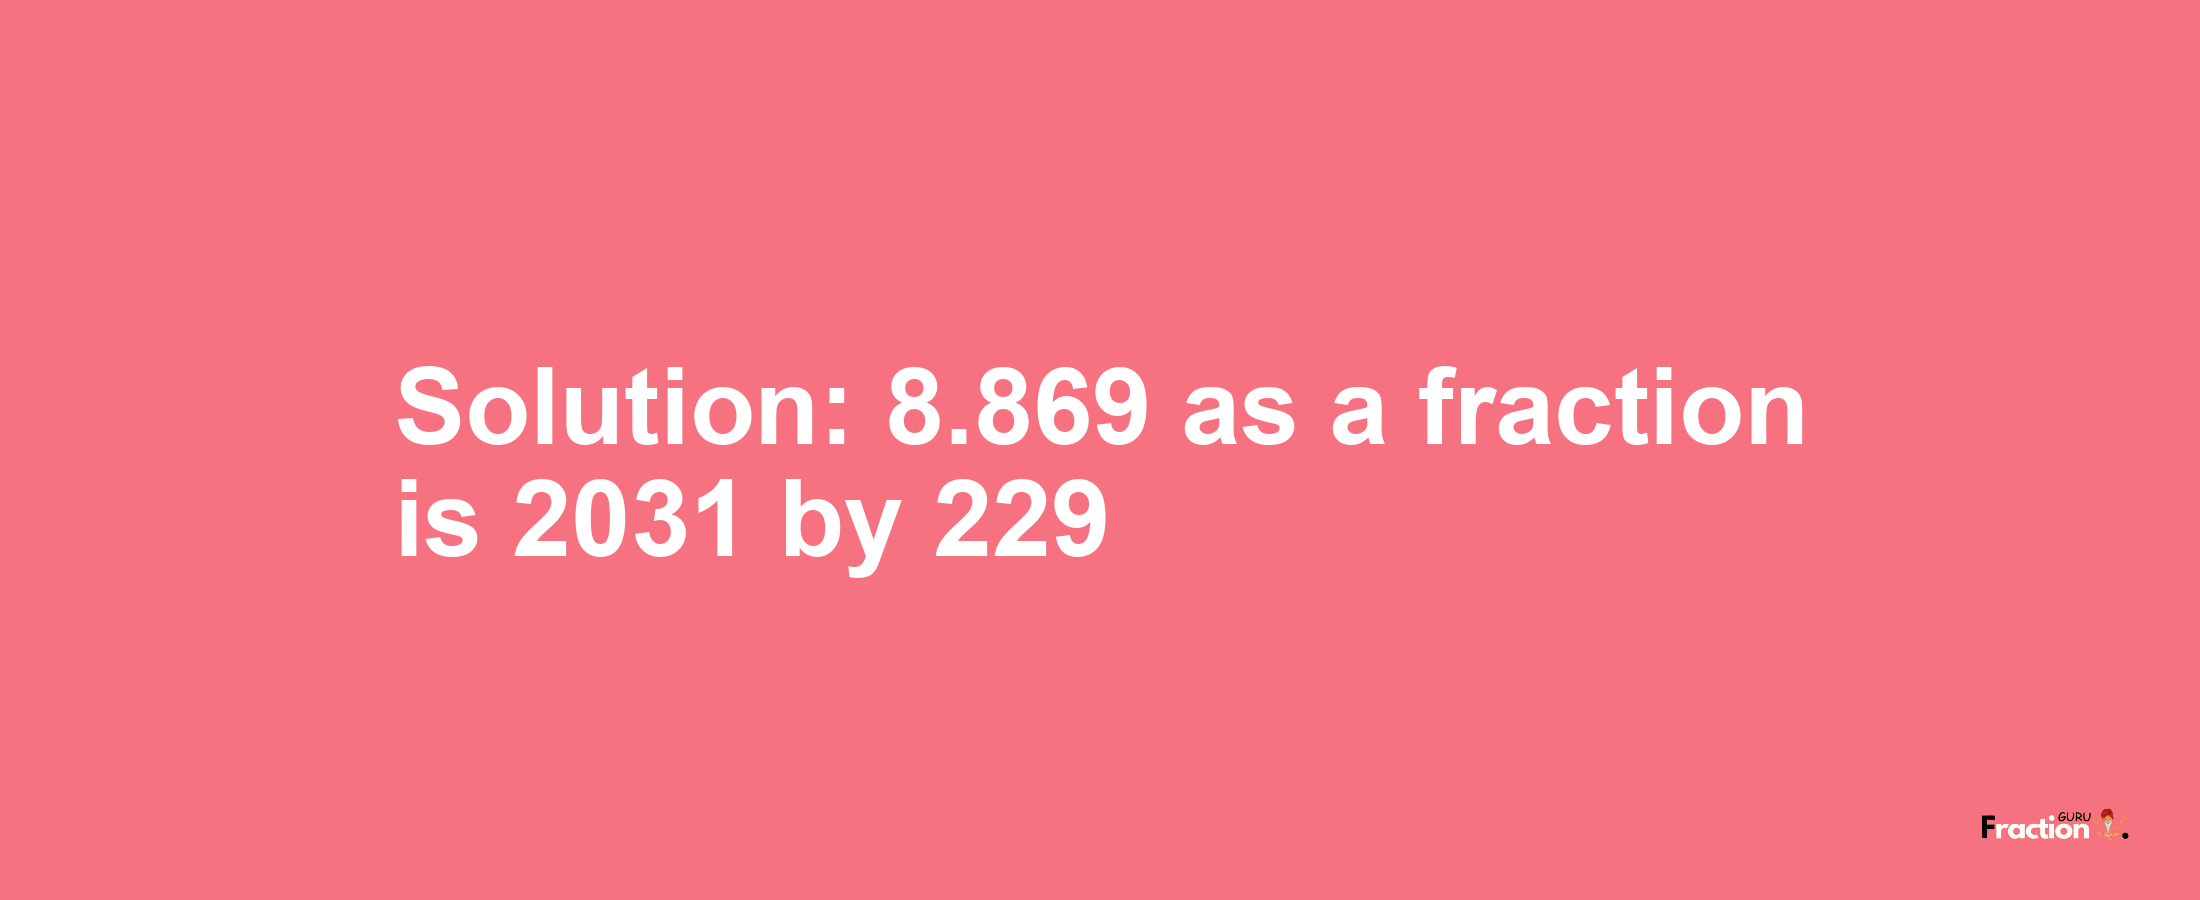 Solution:8.869 as a fraction is 2031/229